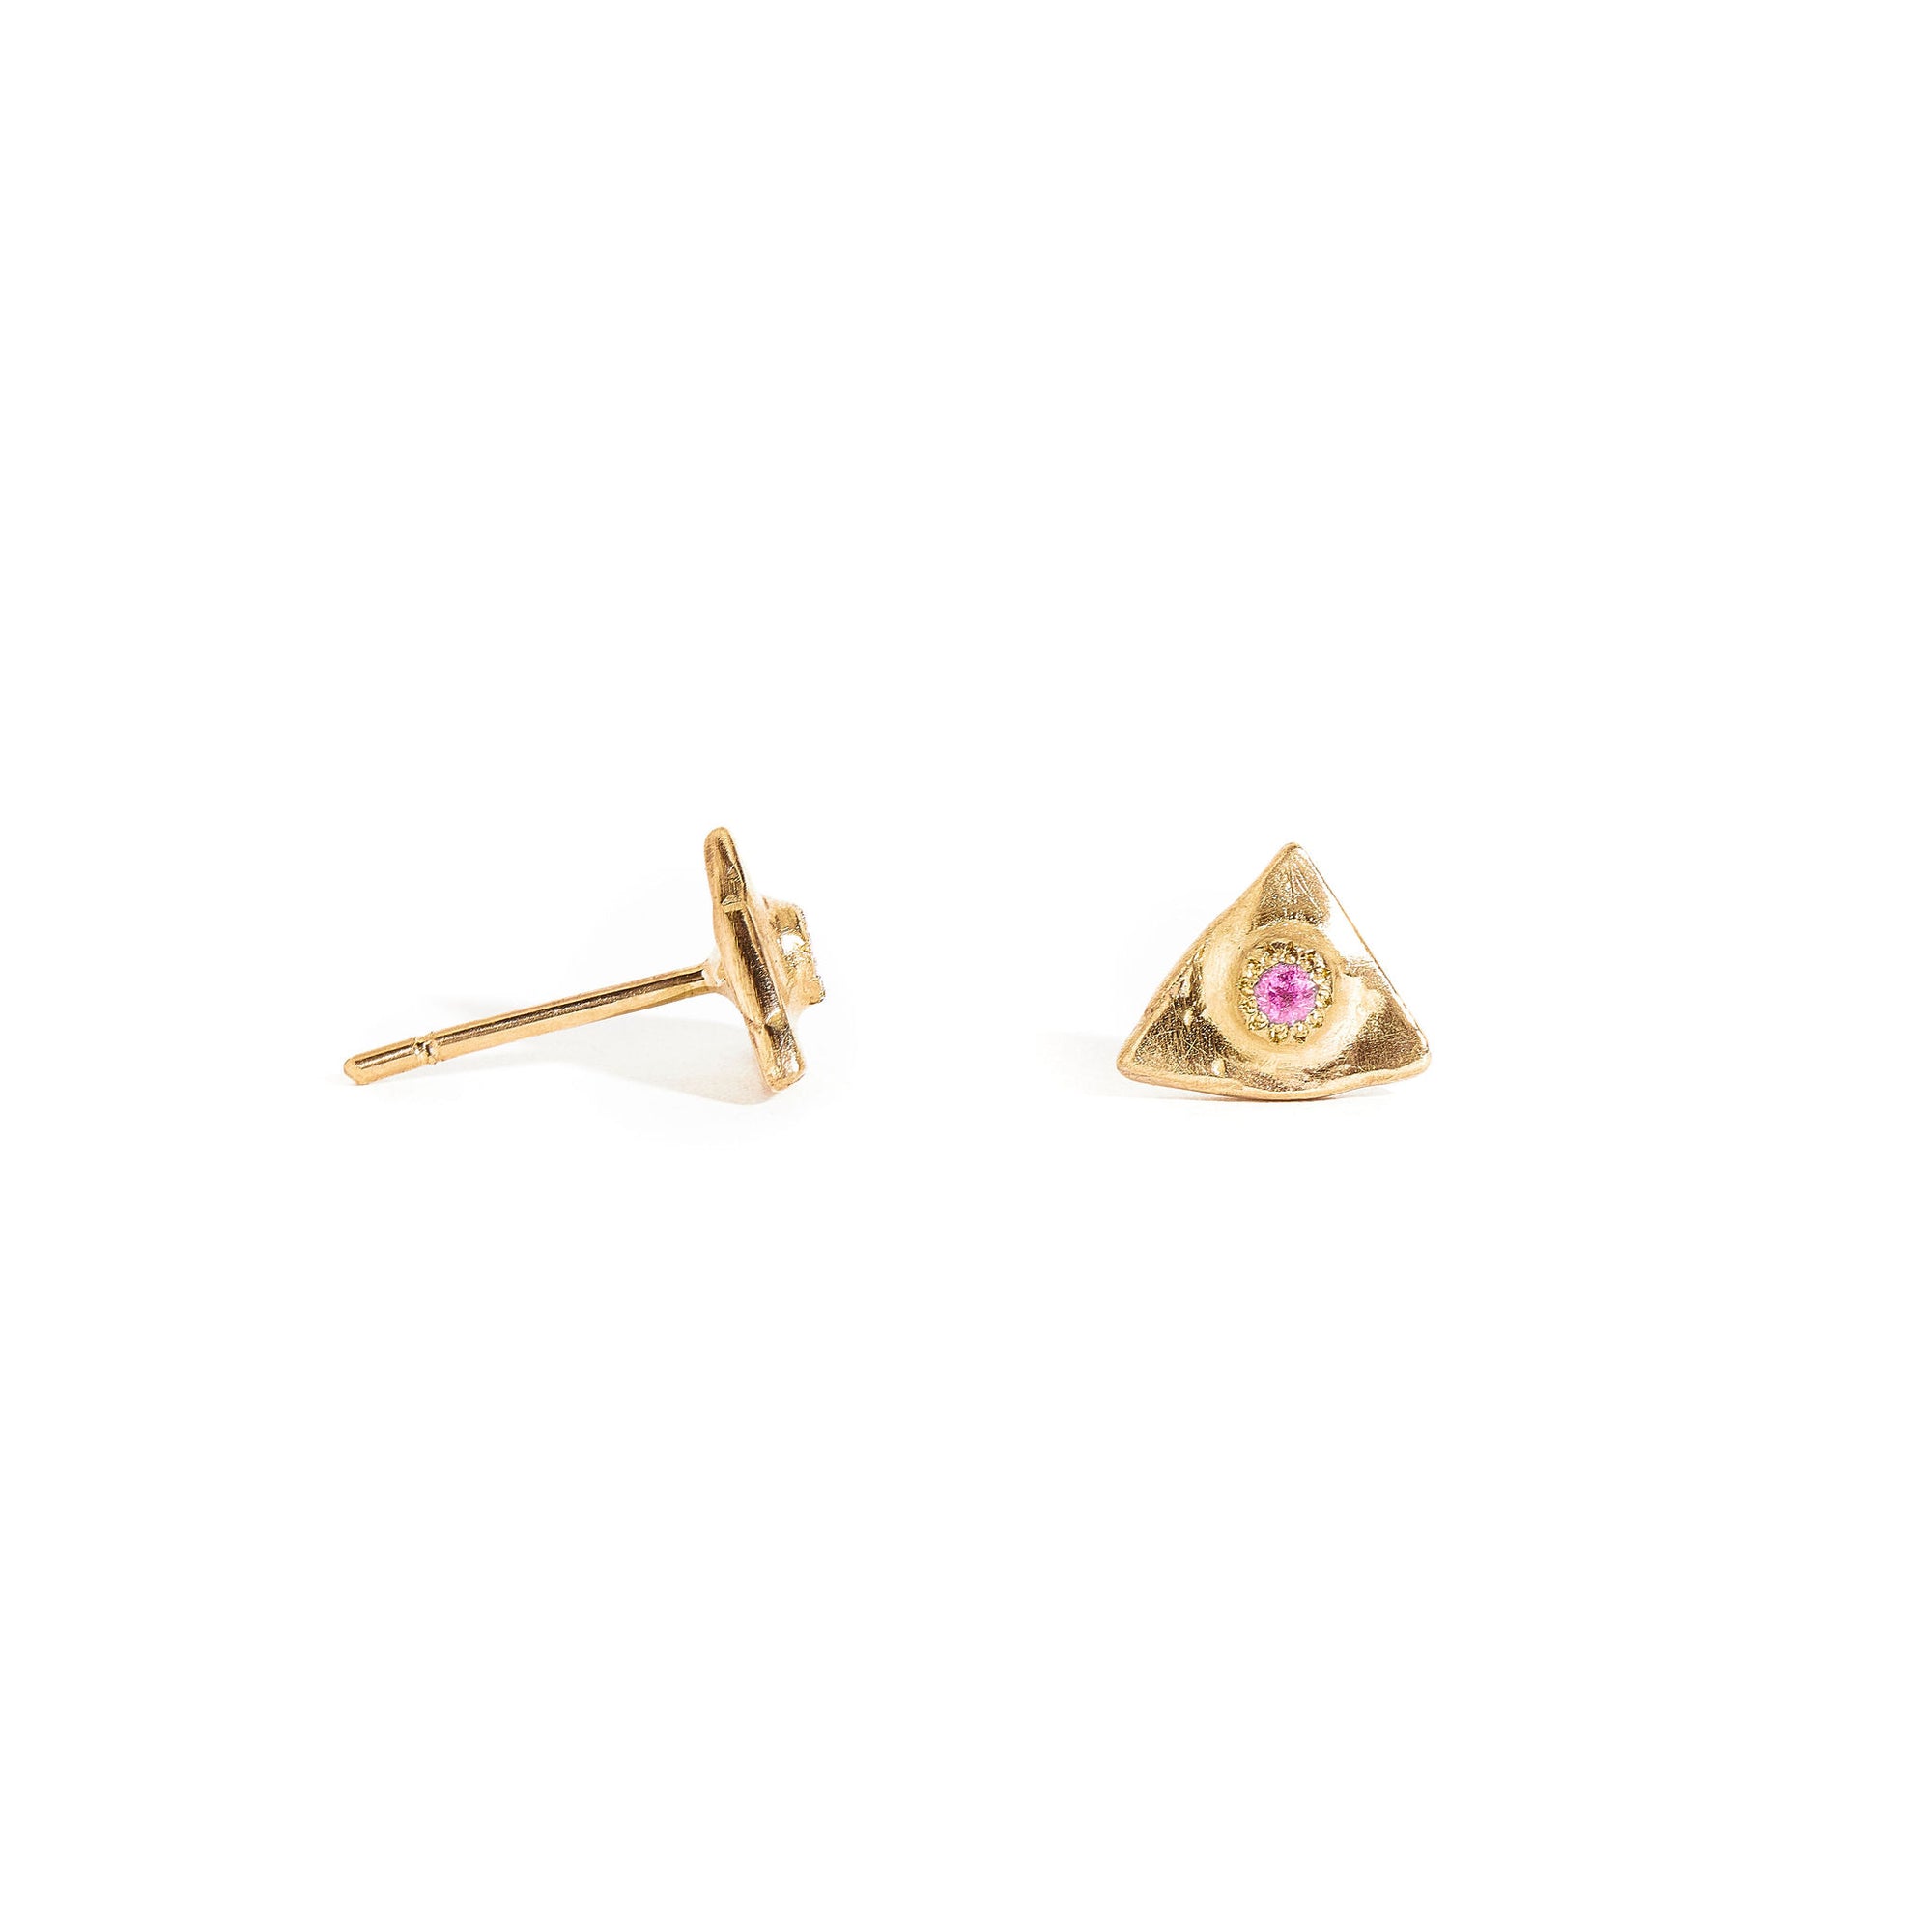 9 carat yellow gold studs set with a pink sapphire. 